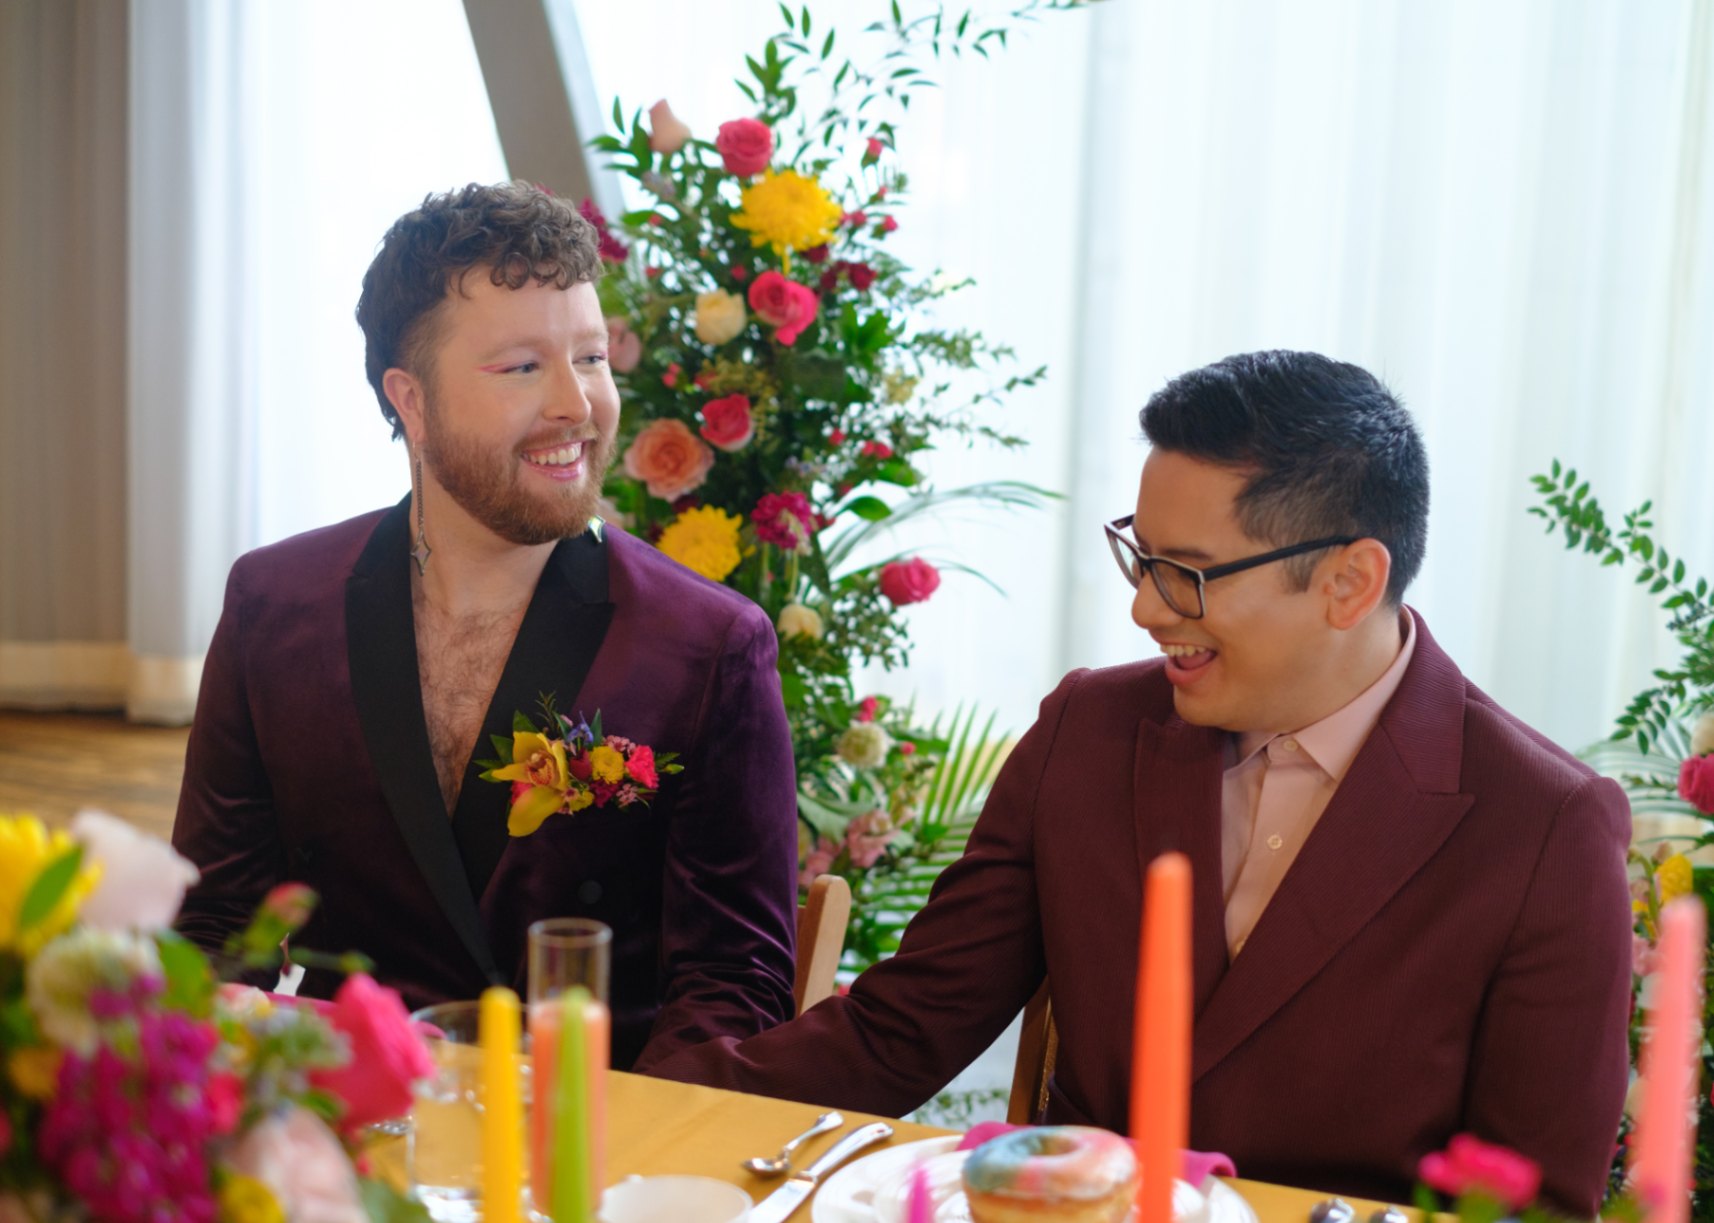 Colorful floral arrangements and a large disco ball hanging from ceiling for queer wedding inspiration while queer nonbinary couple chats and laughs. The linens and candles are yellow, green, orange and pink. The jackets are purple and burgundy.